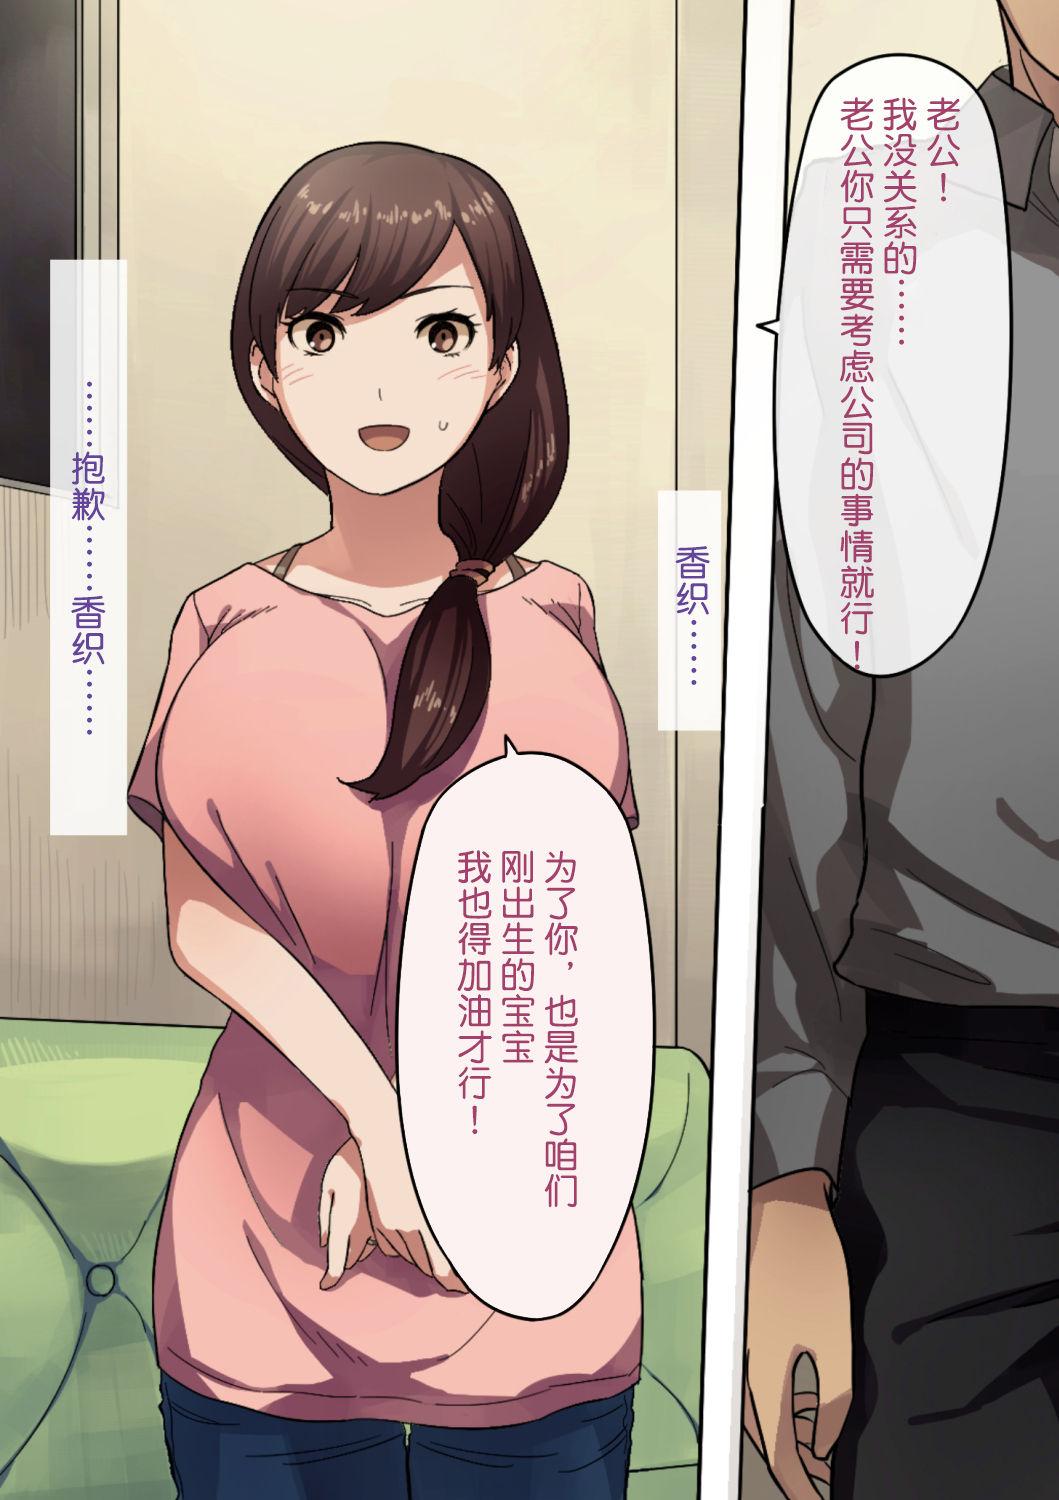 Gostosas [NT Labo] Aisai, Doui no Ue, Netorare | Beloved Wife - Netorare After Consent[Chinese]【不可视汉化】 Gay Uncut - Page 5